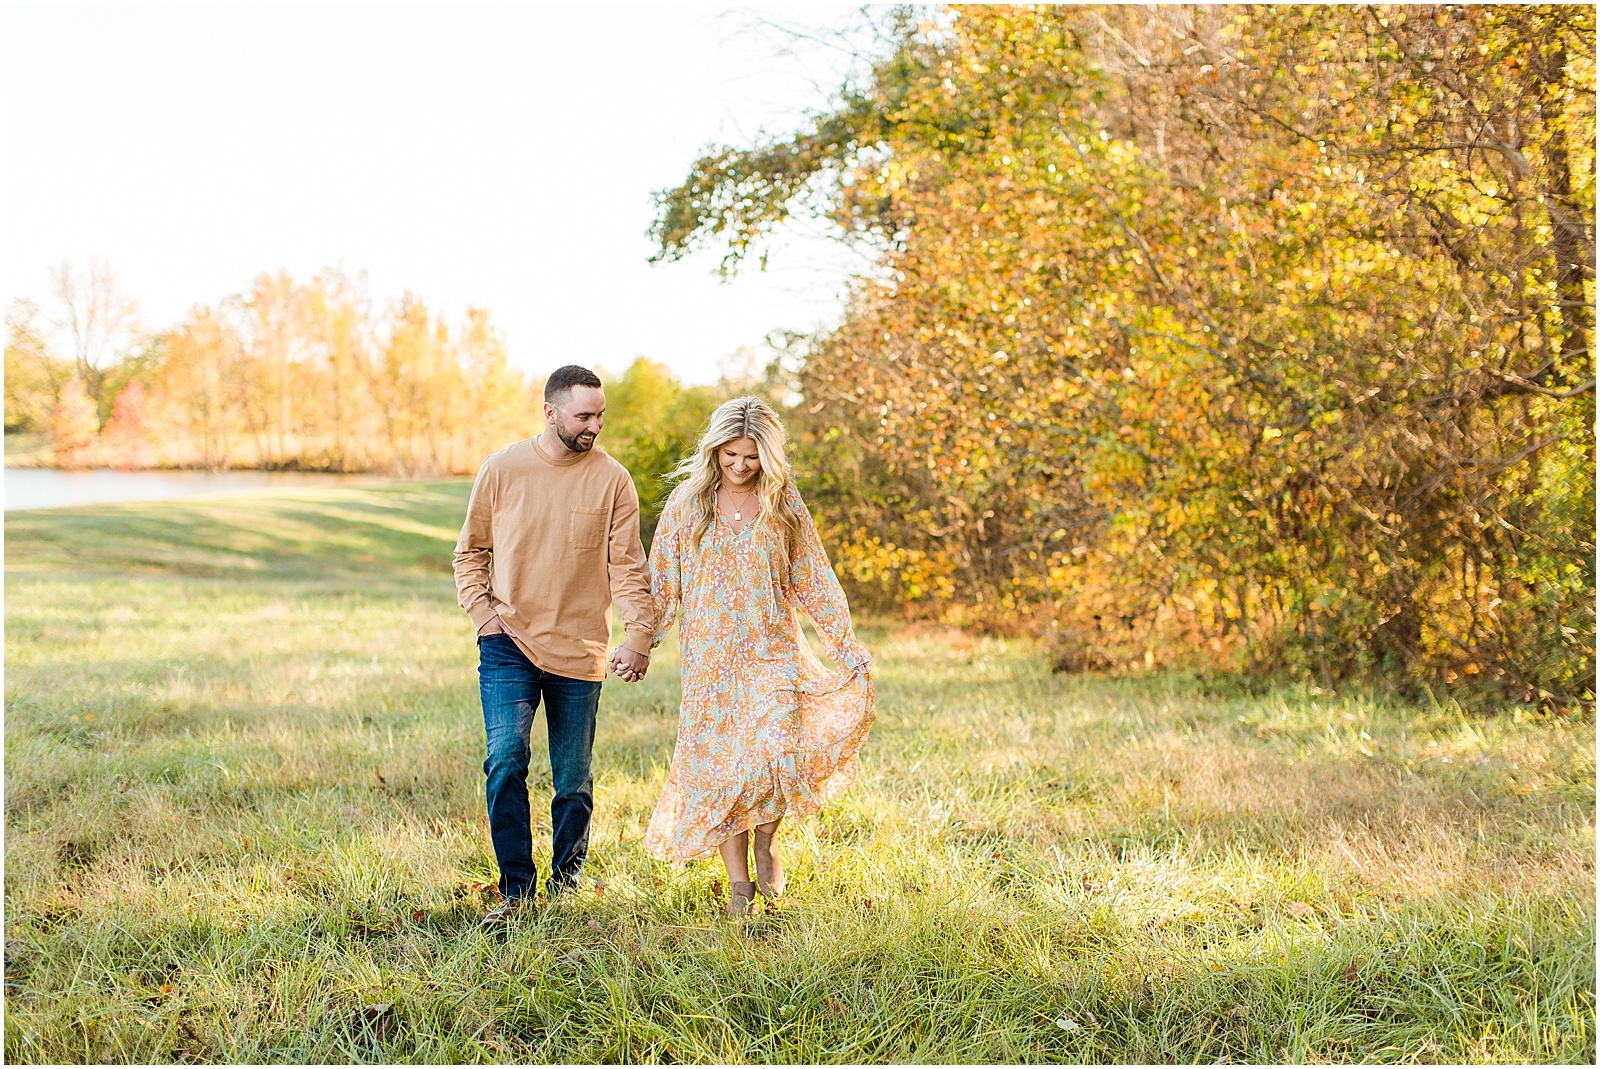 A Southern Indiana Engagement Session | Charleston and Erin | Bret and Brandie Photography008.jpg